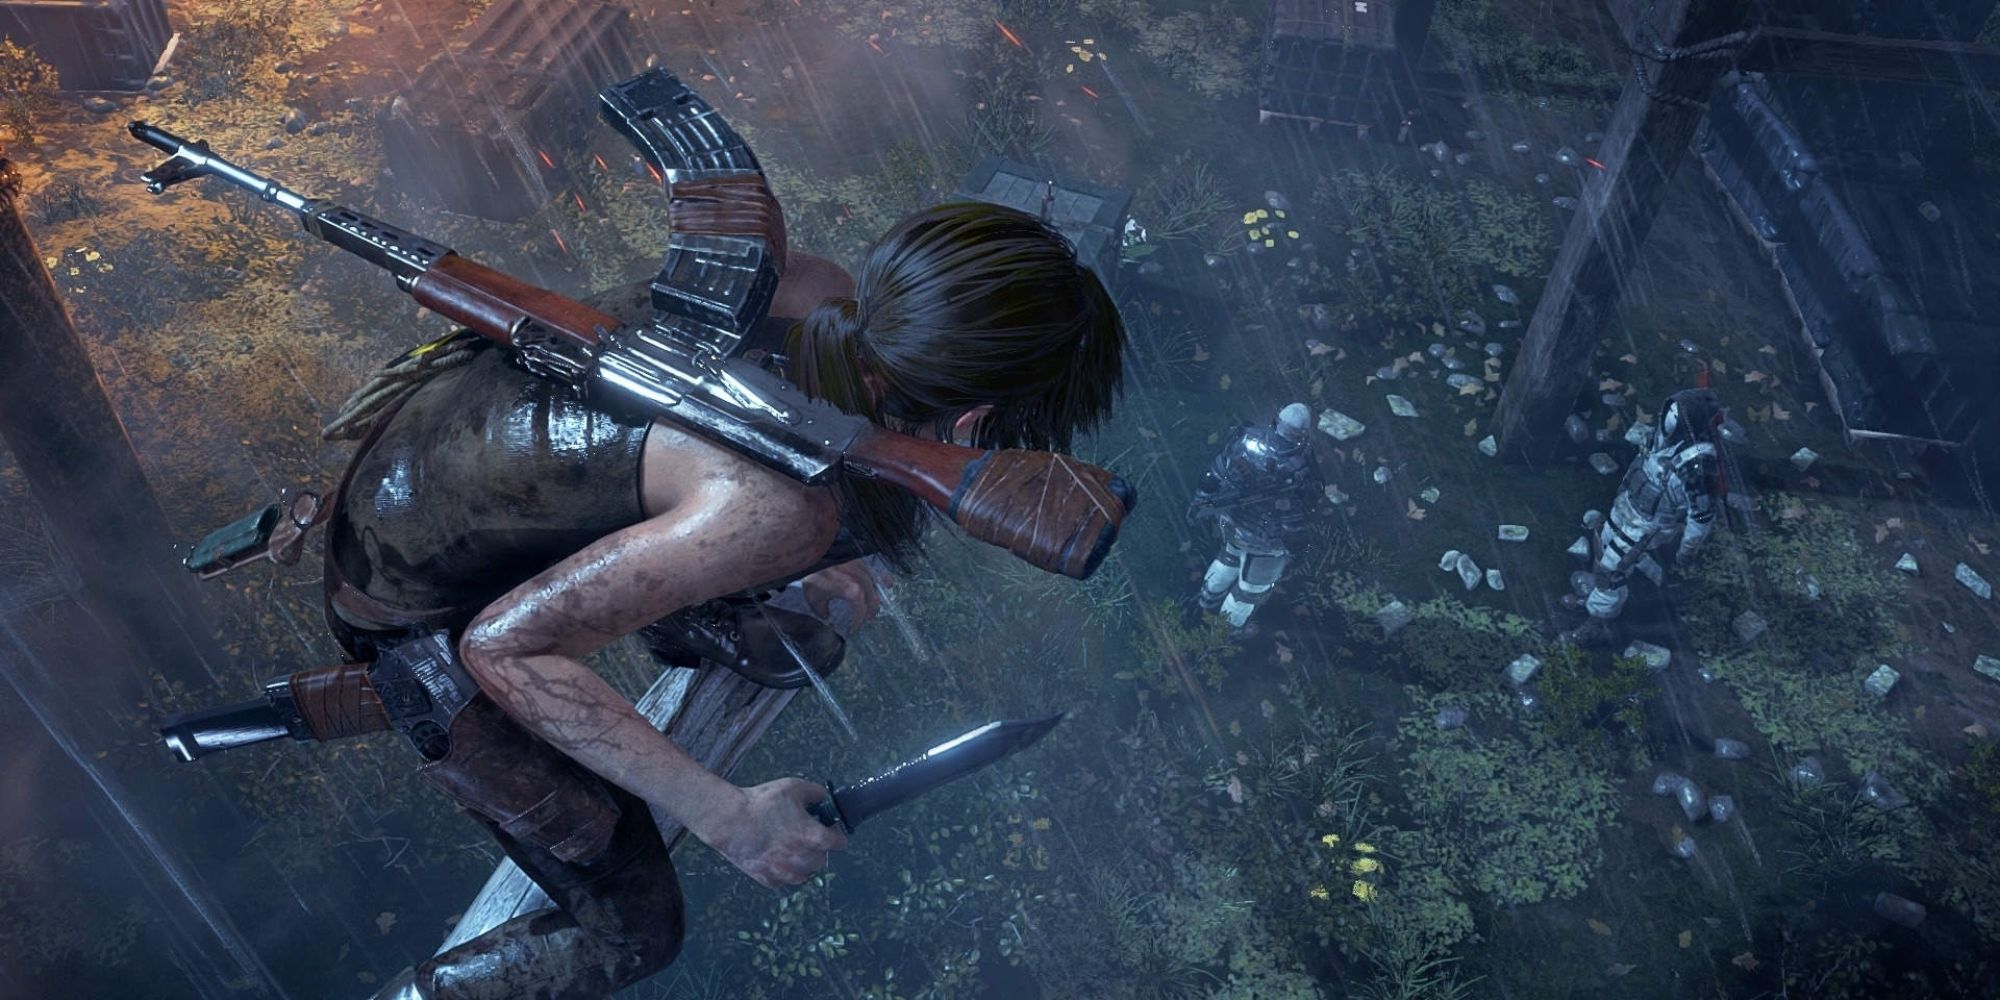 Rise Of The Tomb Raider - Screenshot of Lara Croft as she's about to attack enemies from the air.